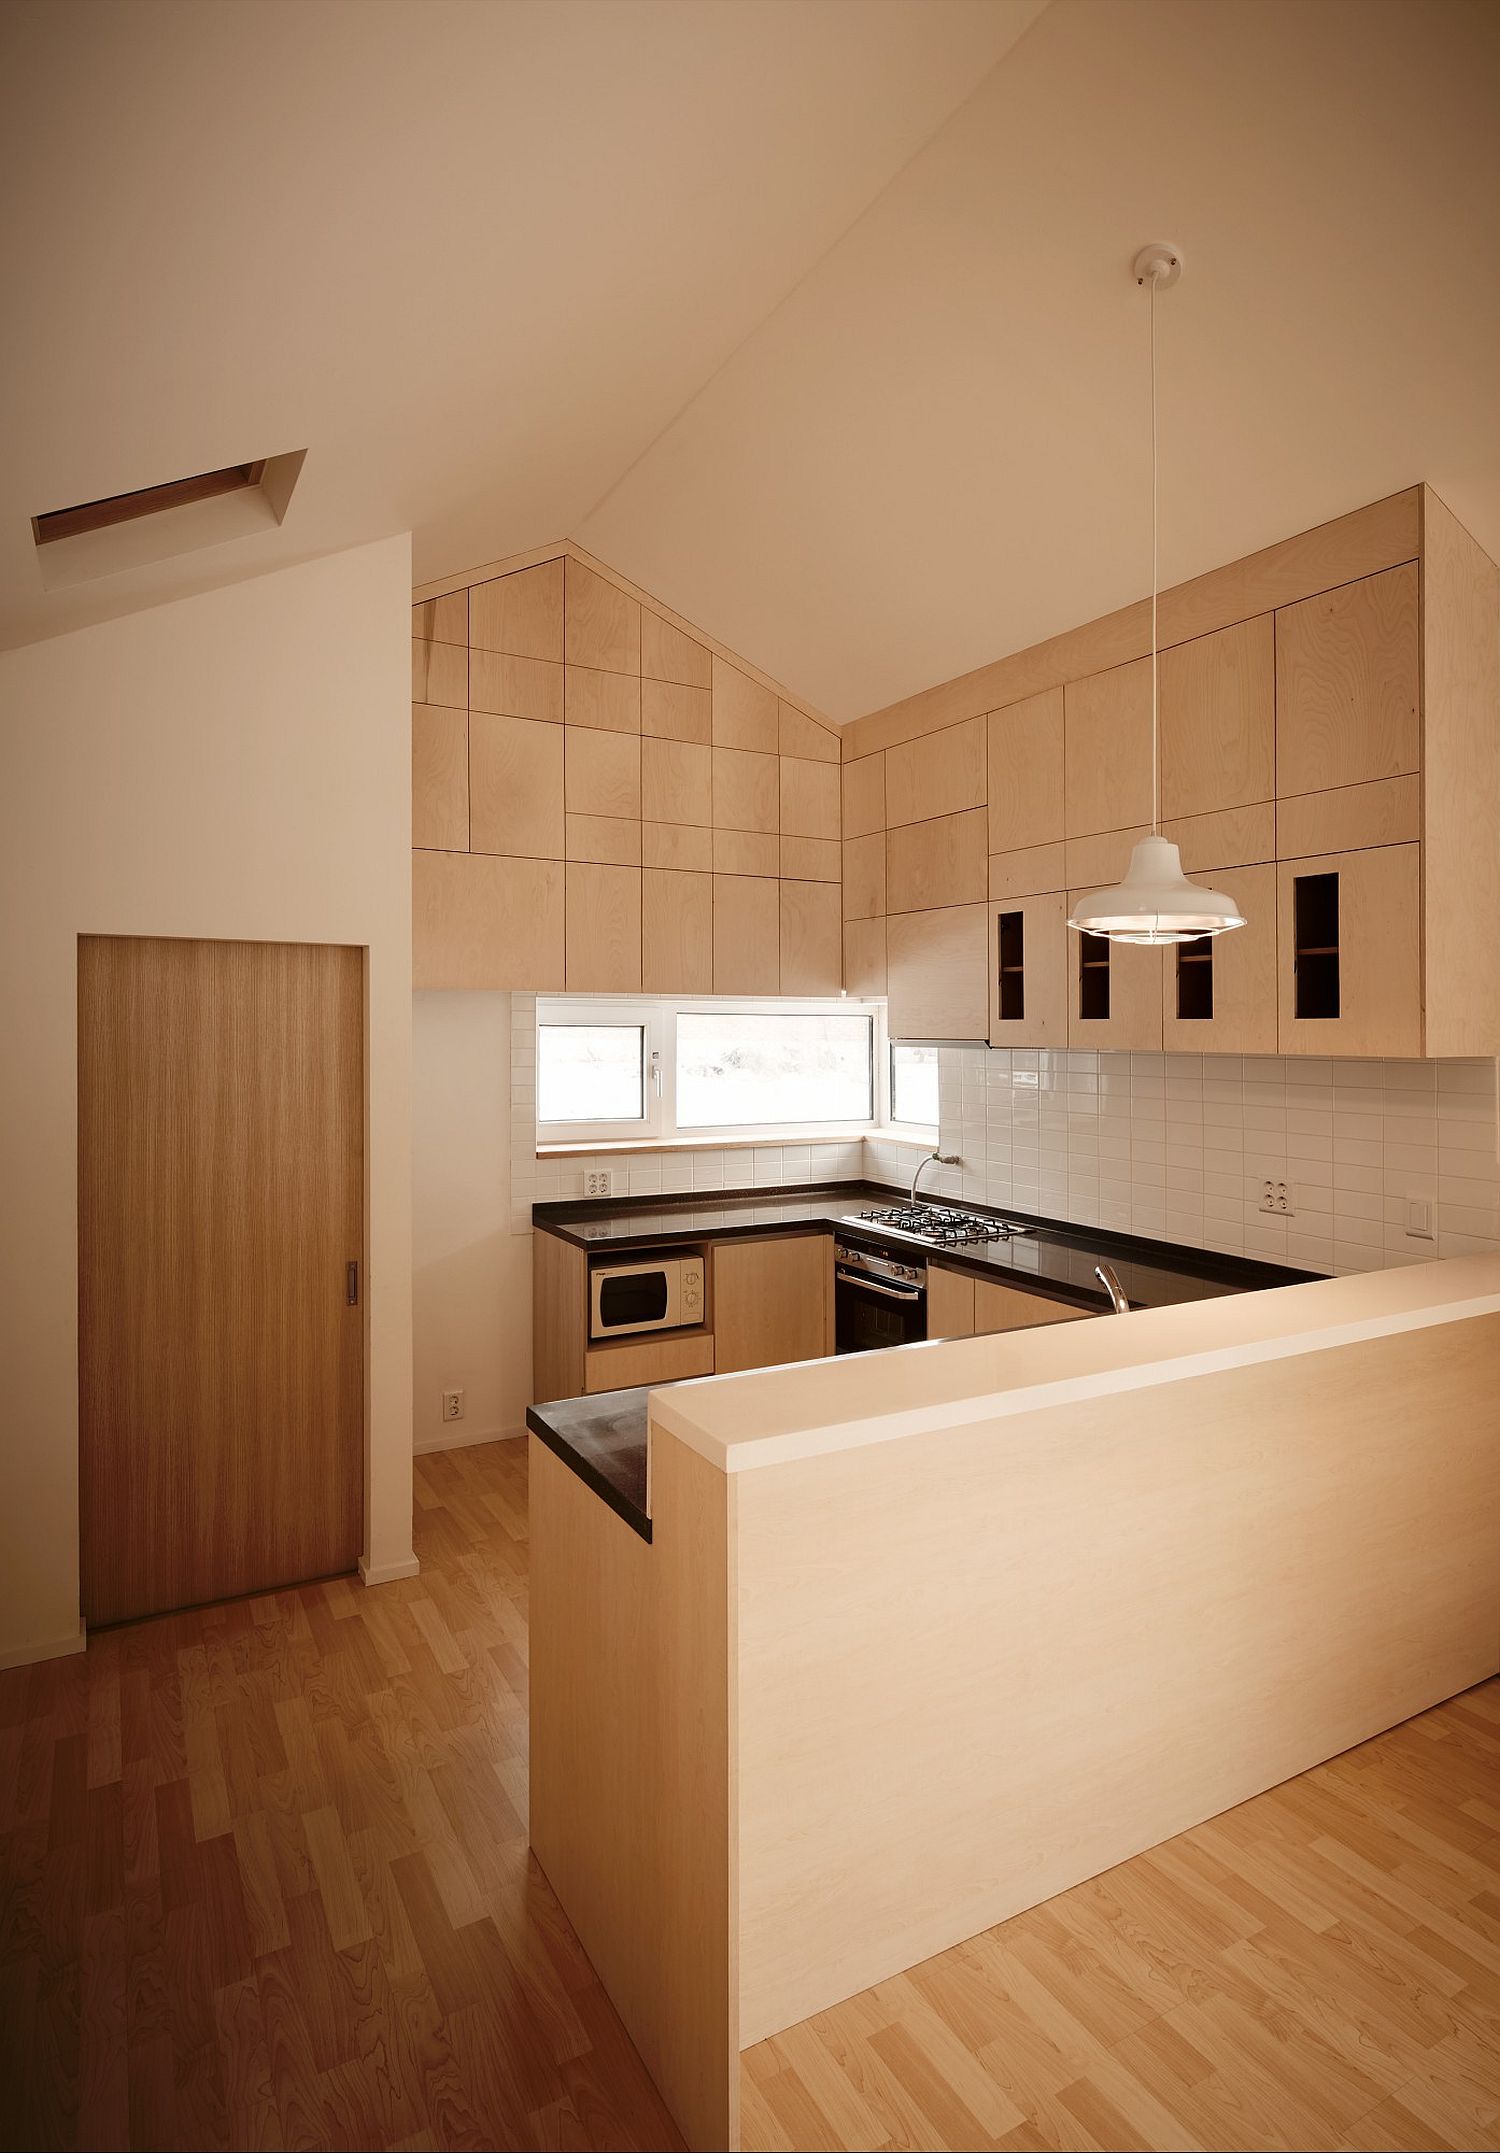 Wooden kitchen and interior of the budget South Korean home